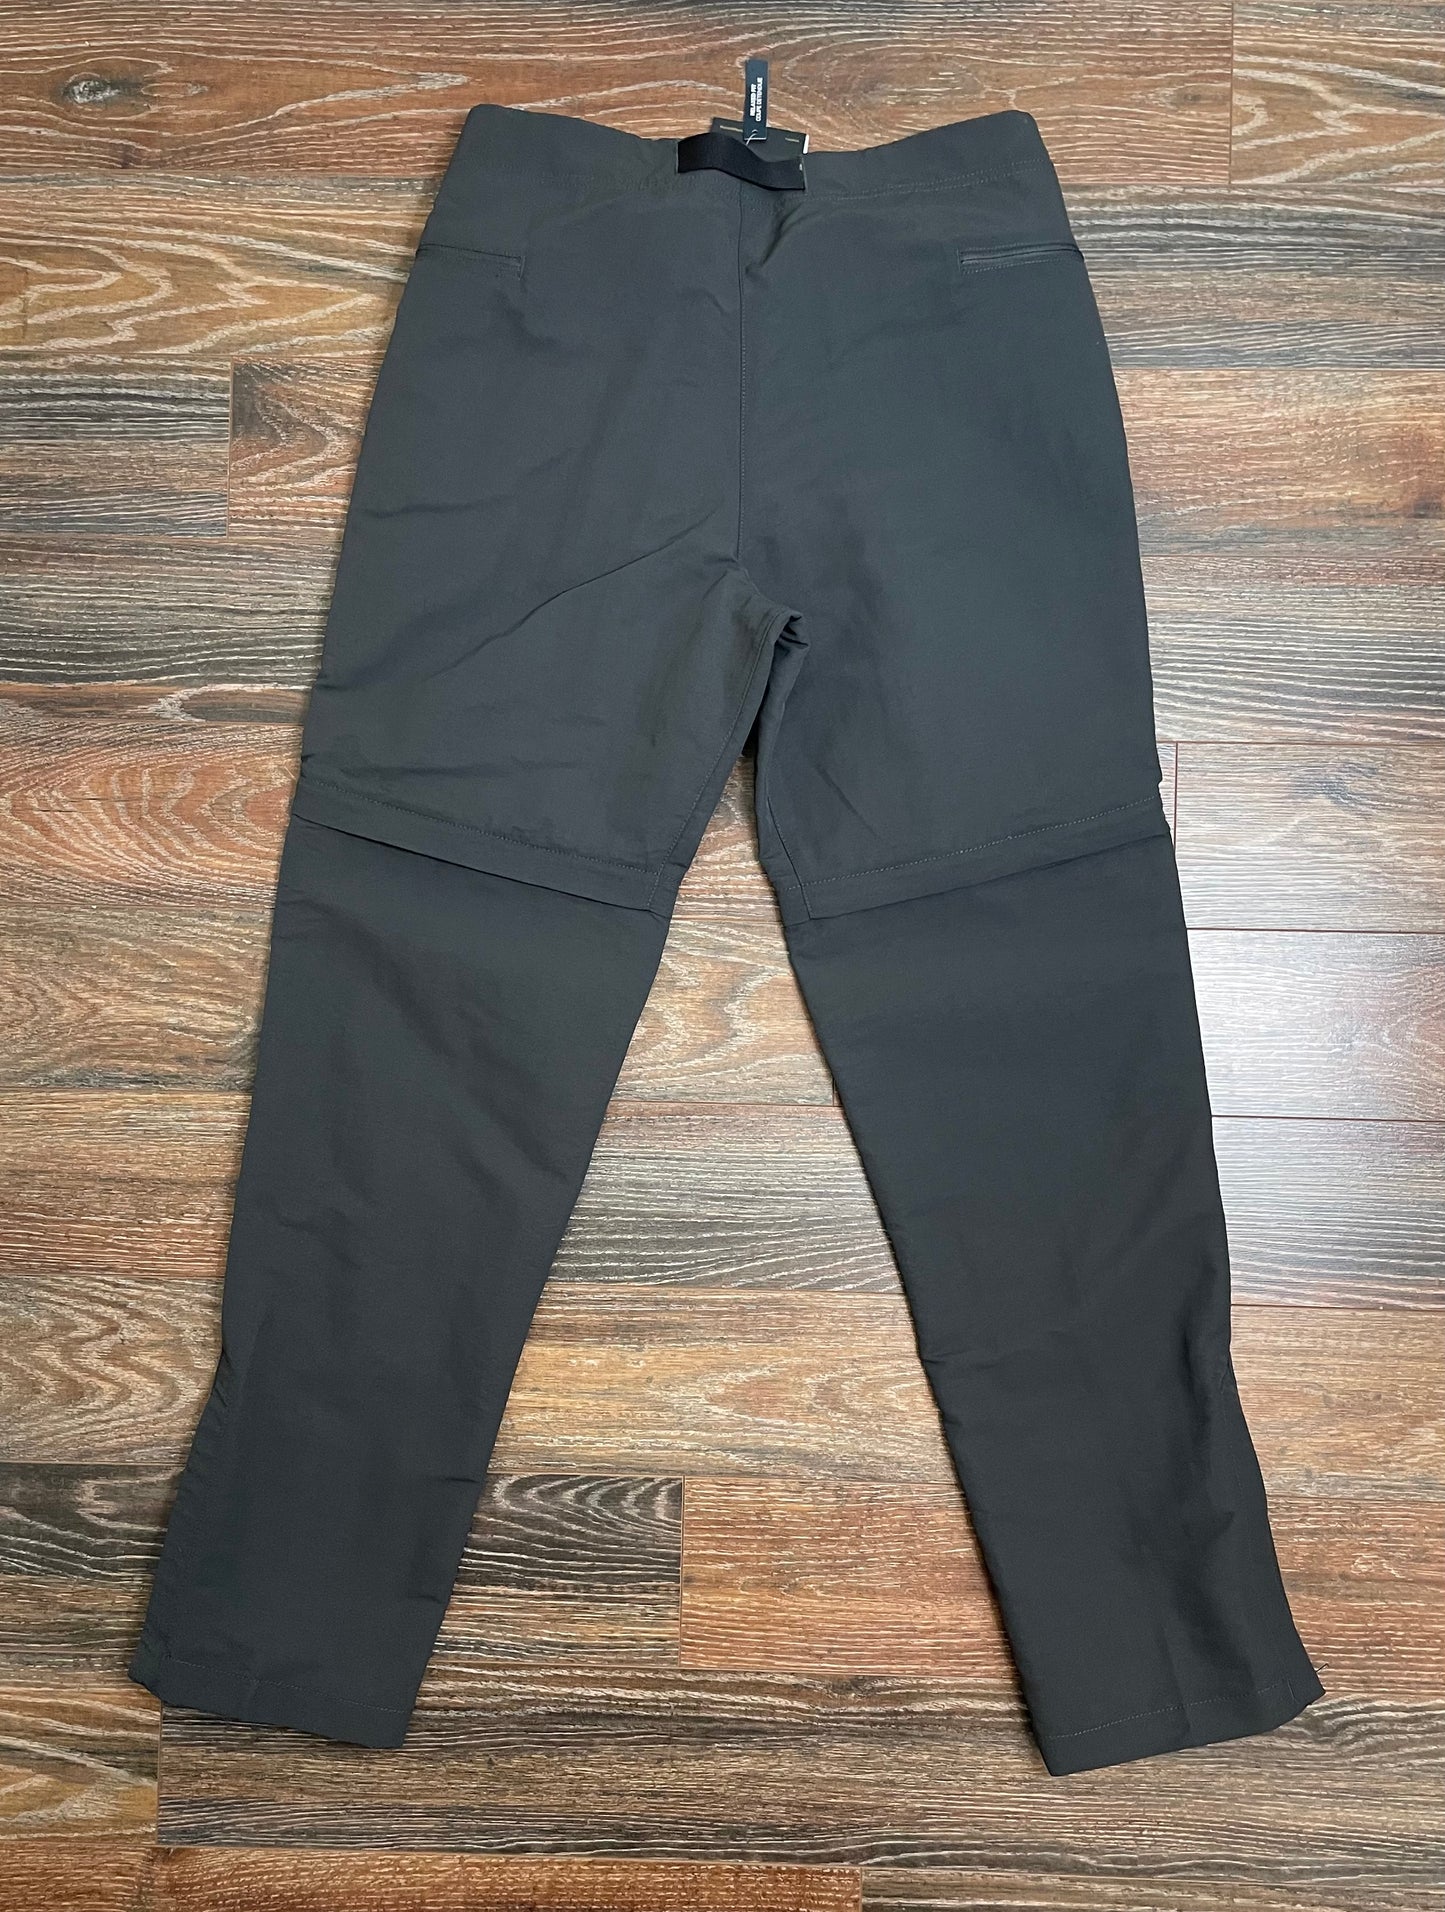 (Tags on) Men’s The North Face Paramount Convertible Pants (32reg)